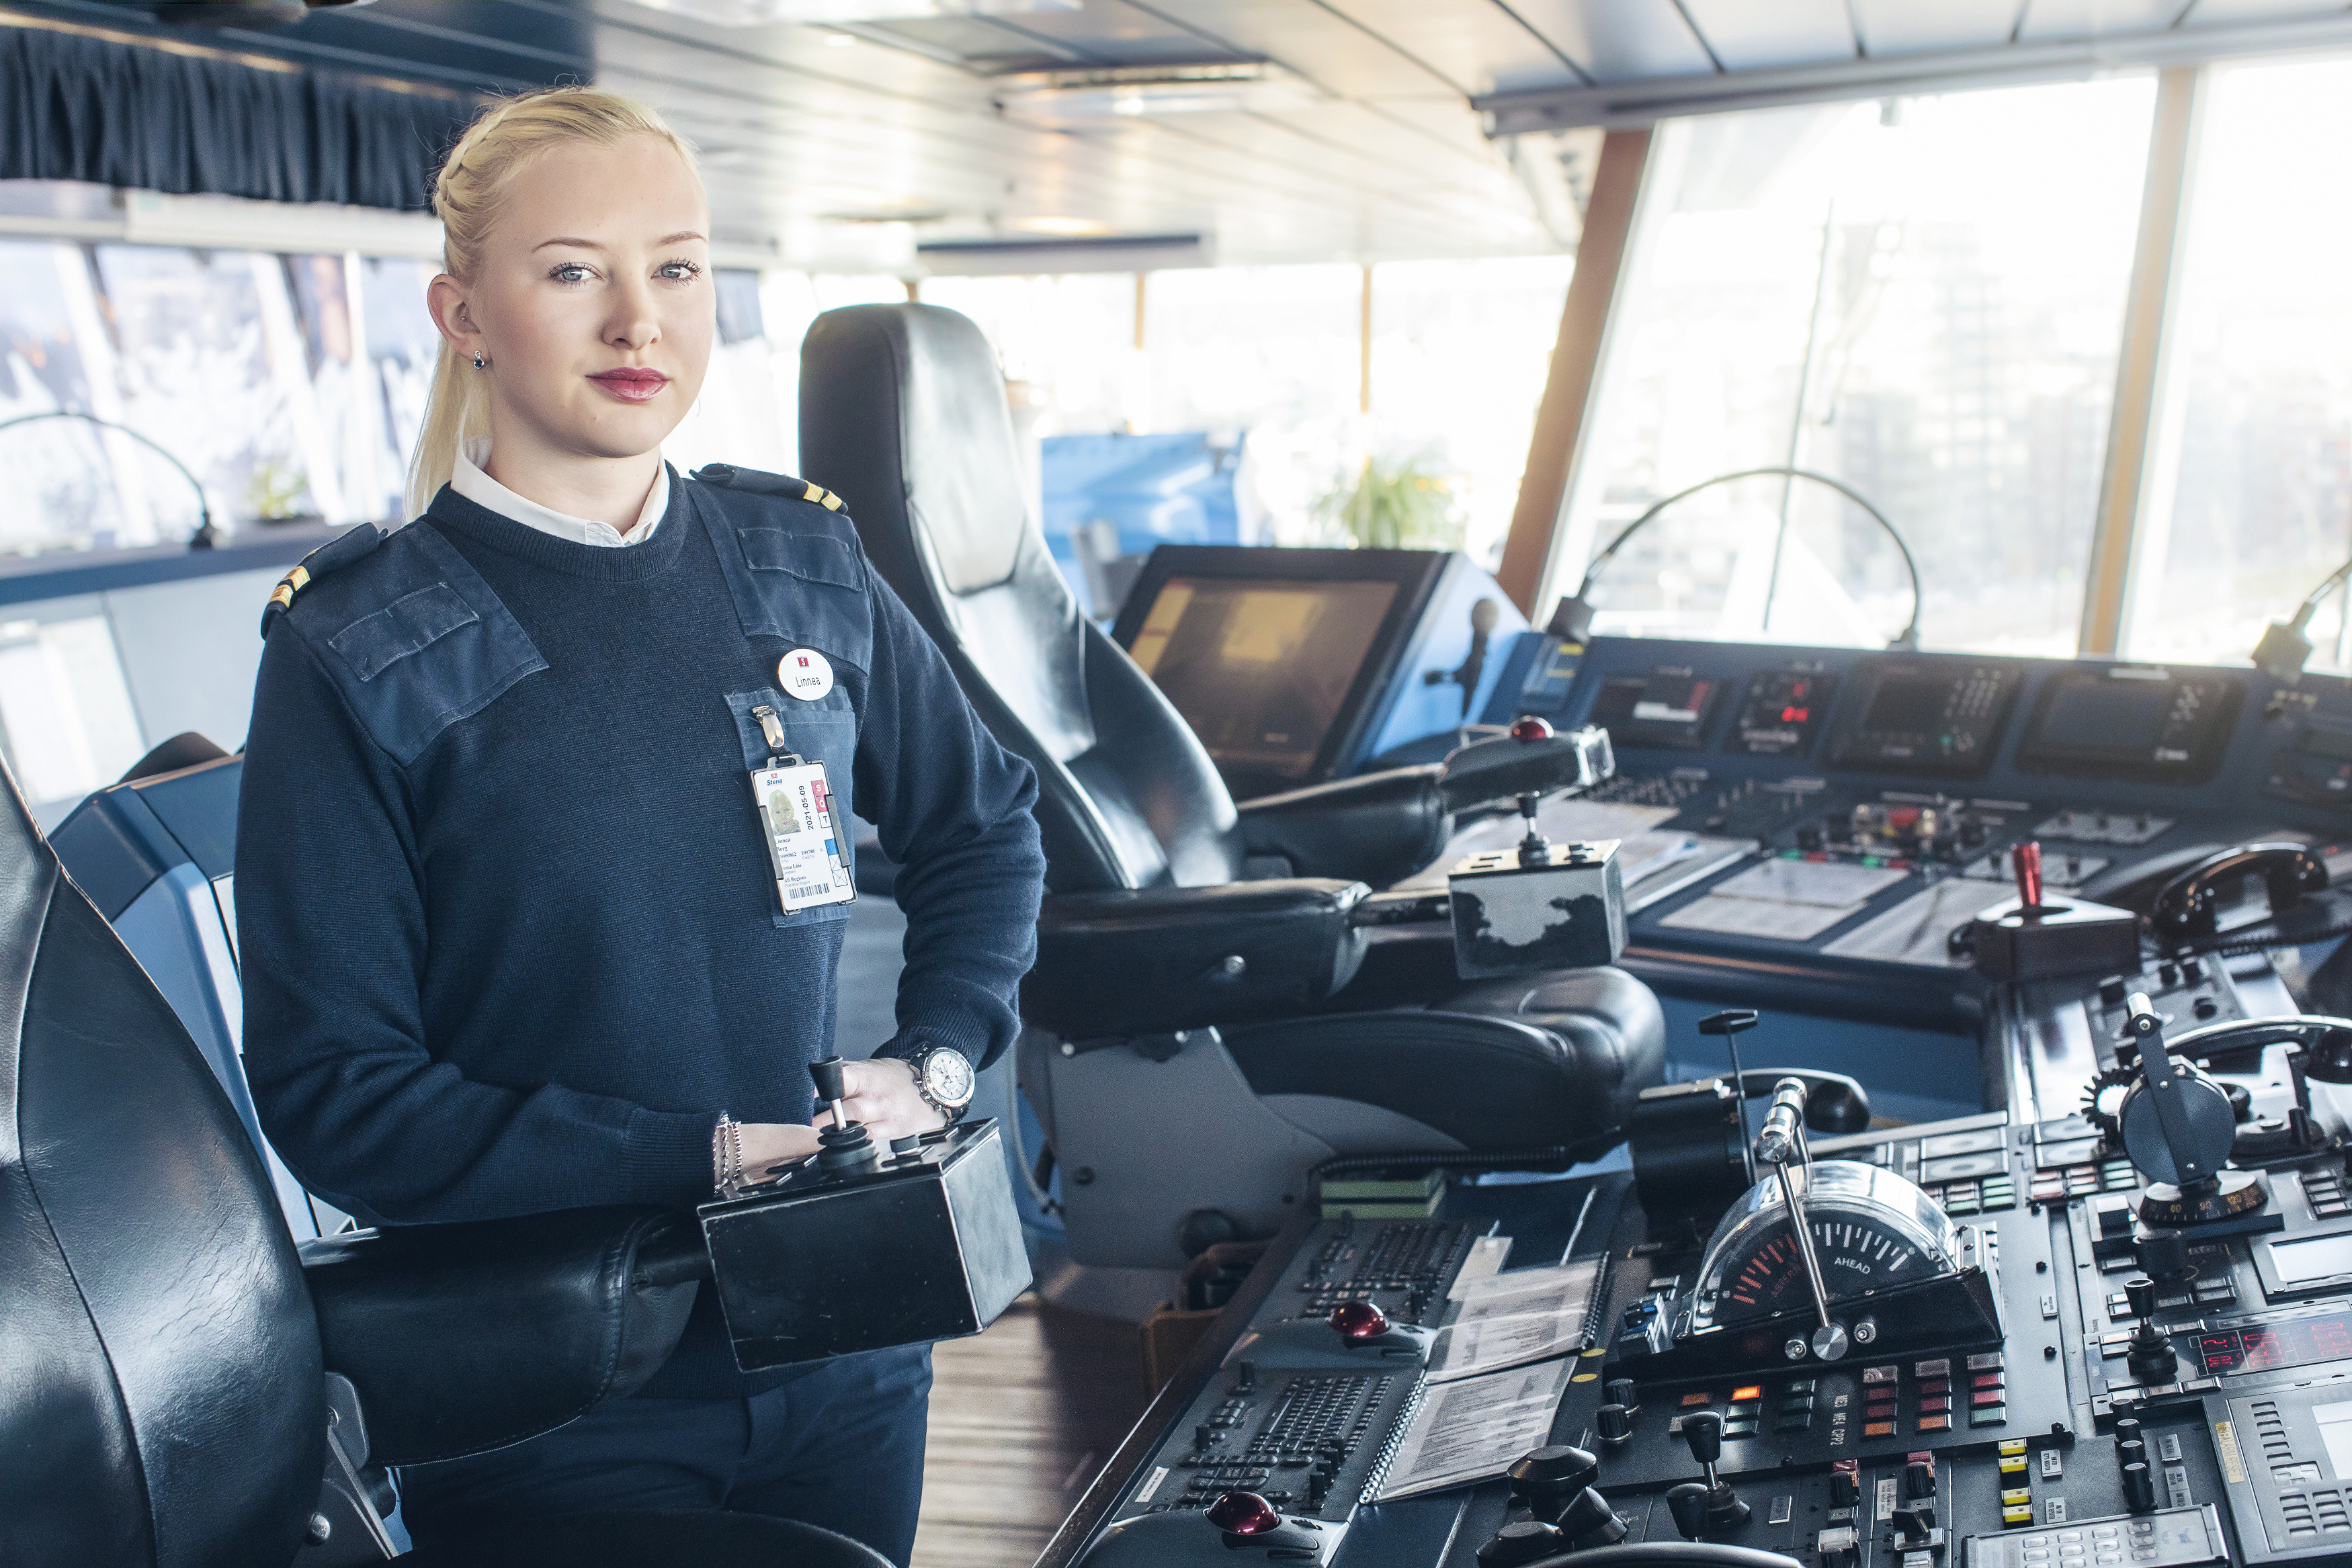 Stena Line is committed to equality and inclusion